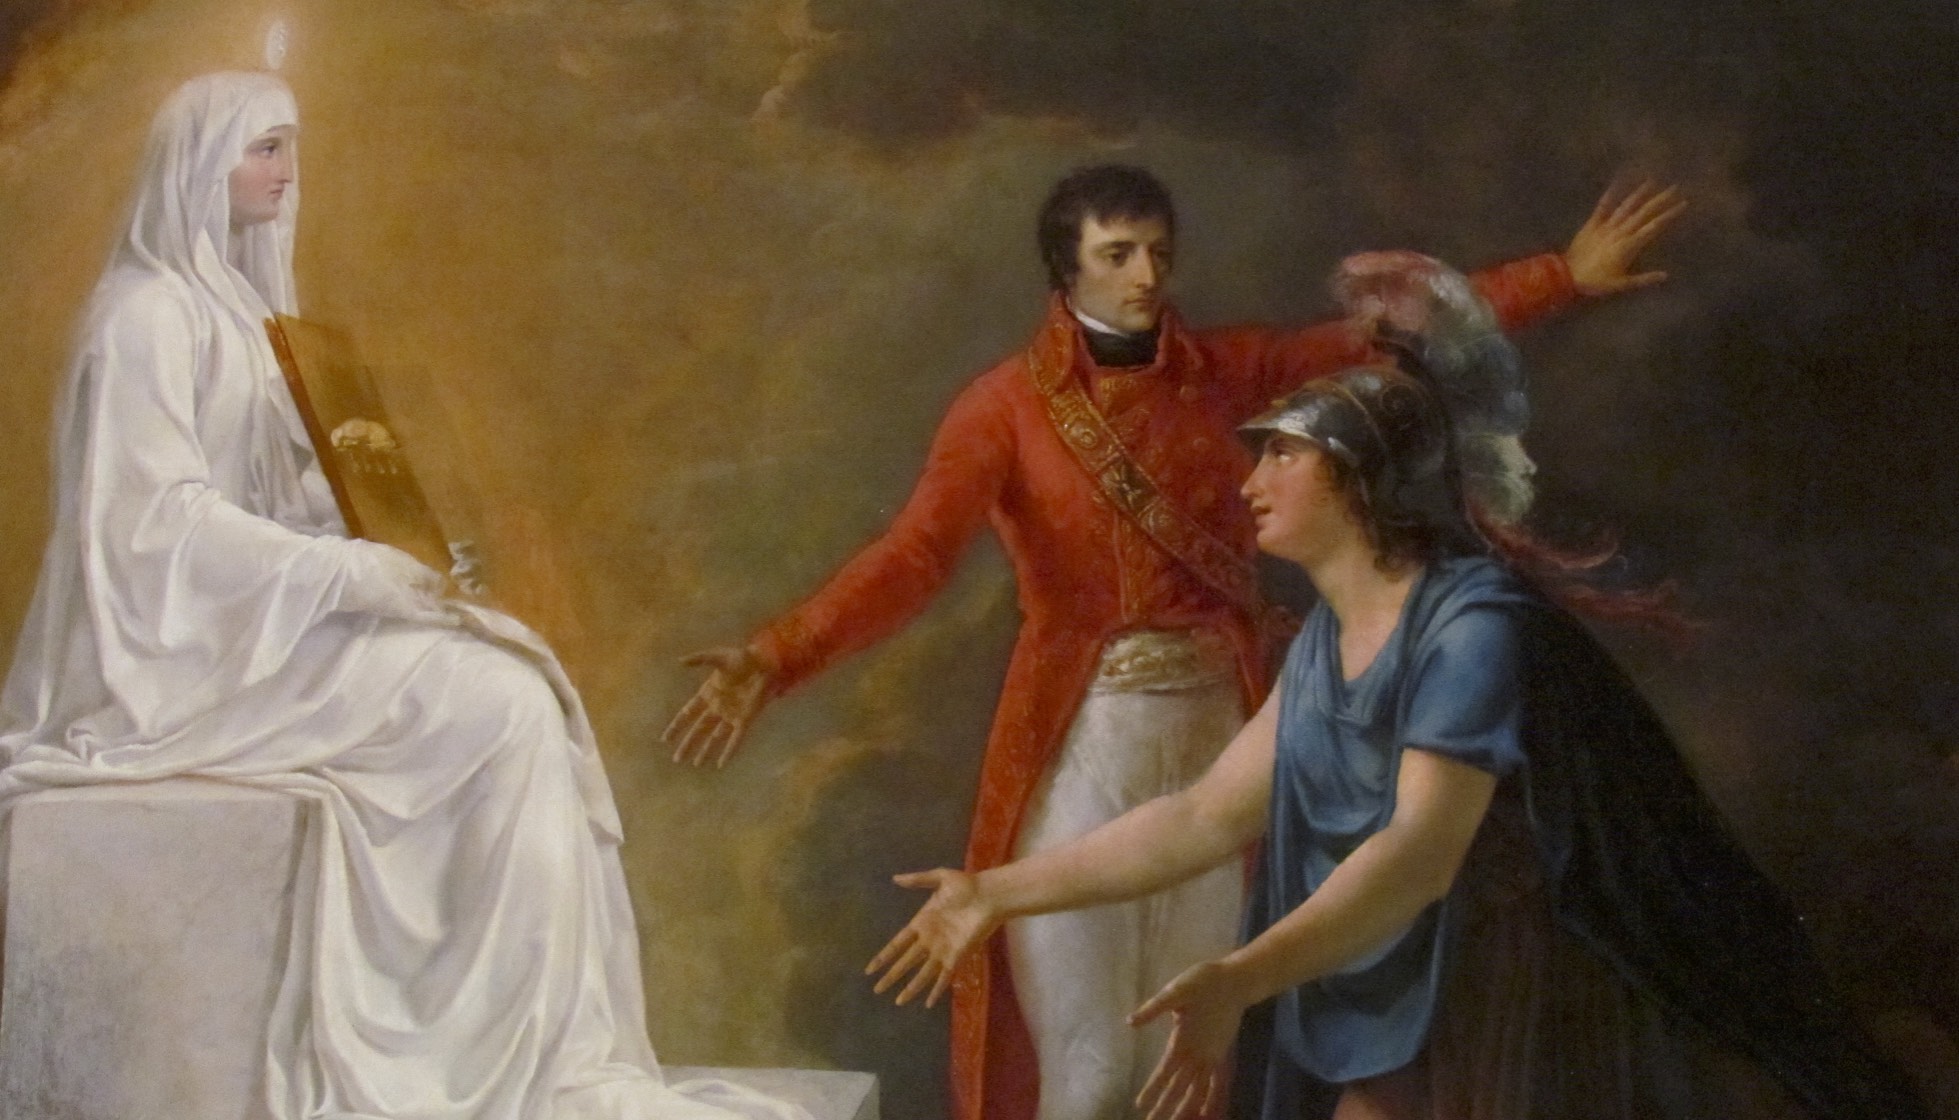 Allegory of the Concordat of 1801, First Consul Napoleon Bonaparte reconciling the Catholic Church and France, Anonymous Painter, in Malmaison, France, photo by Margaret Rodenberg